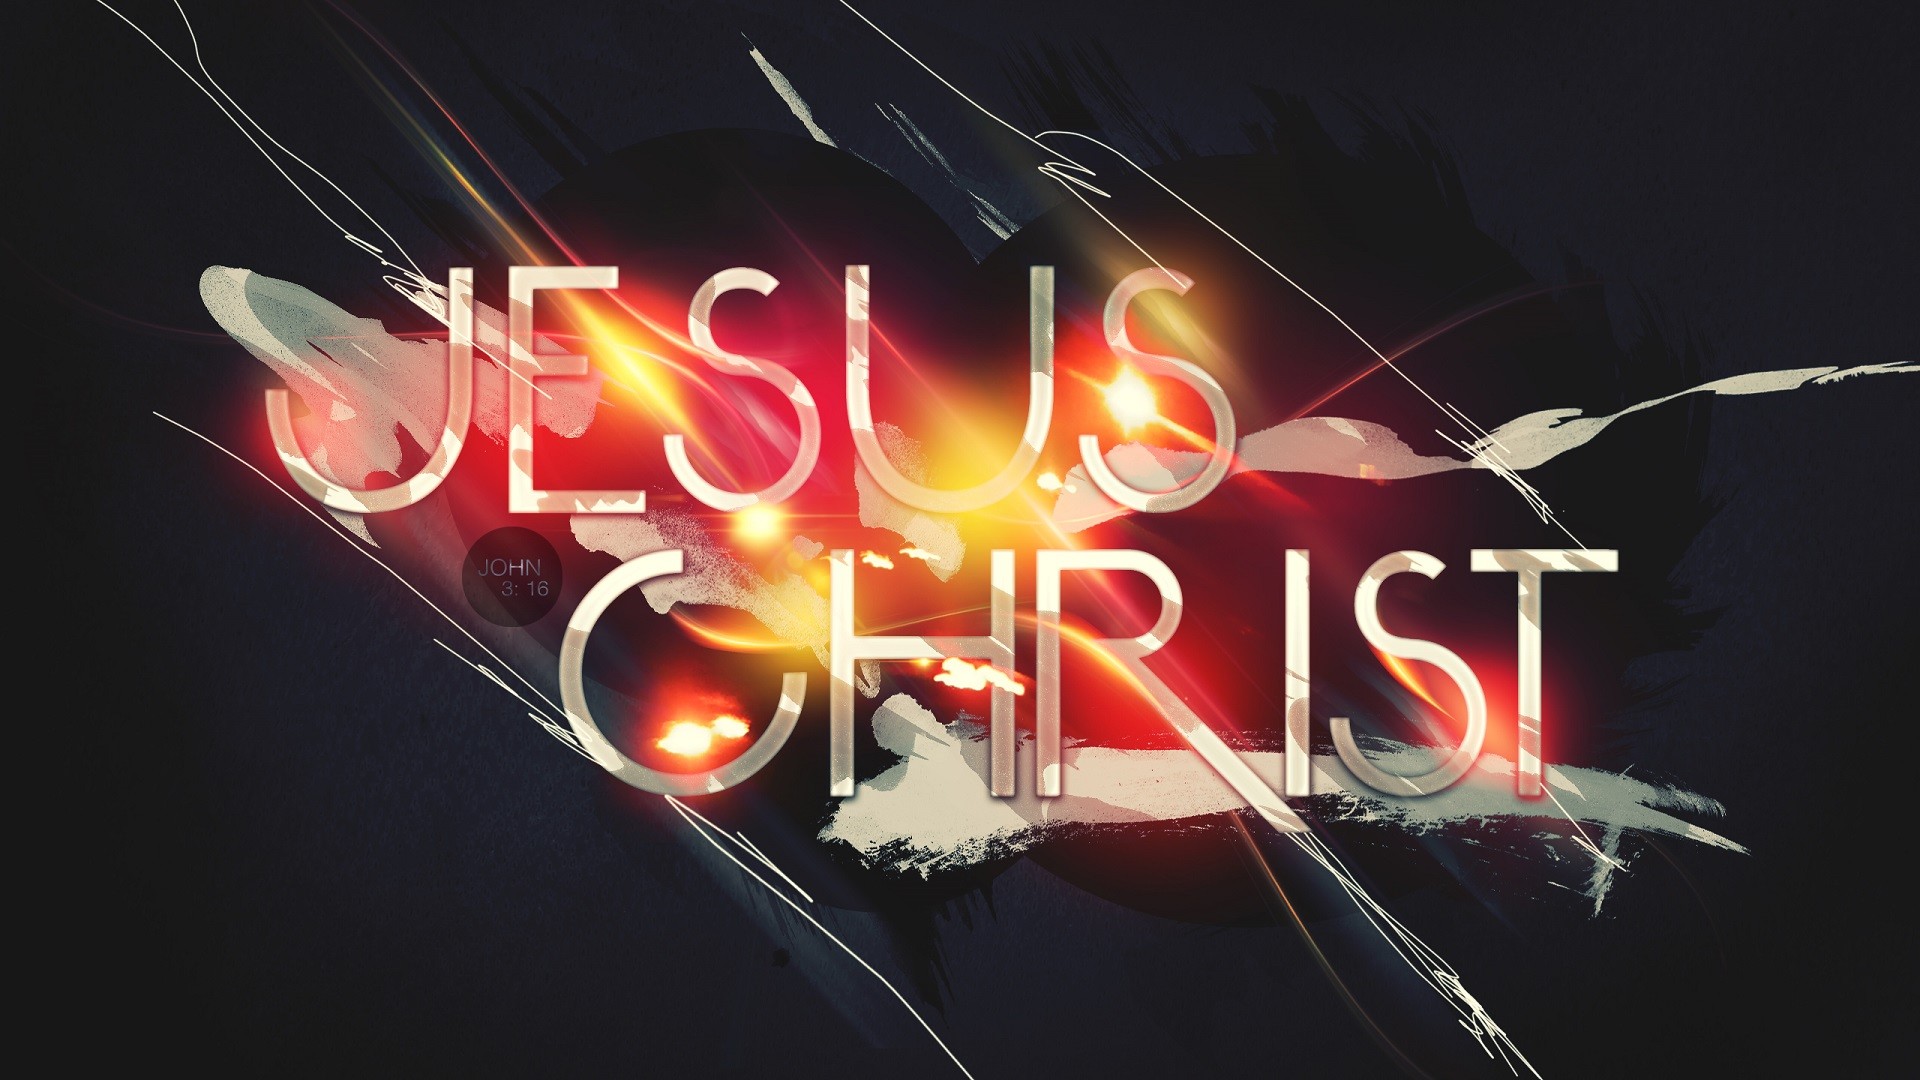 Christian HD Wallpapers 1080p (71+ images)